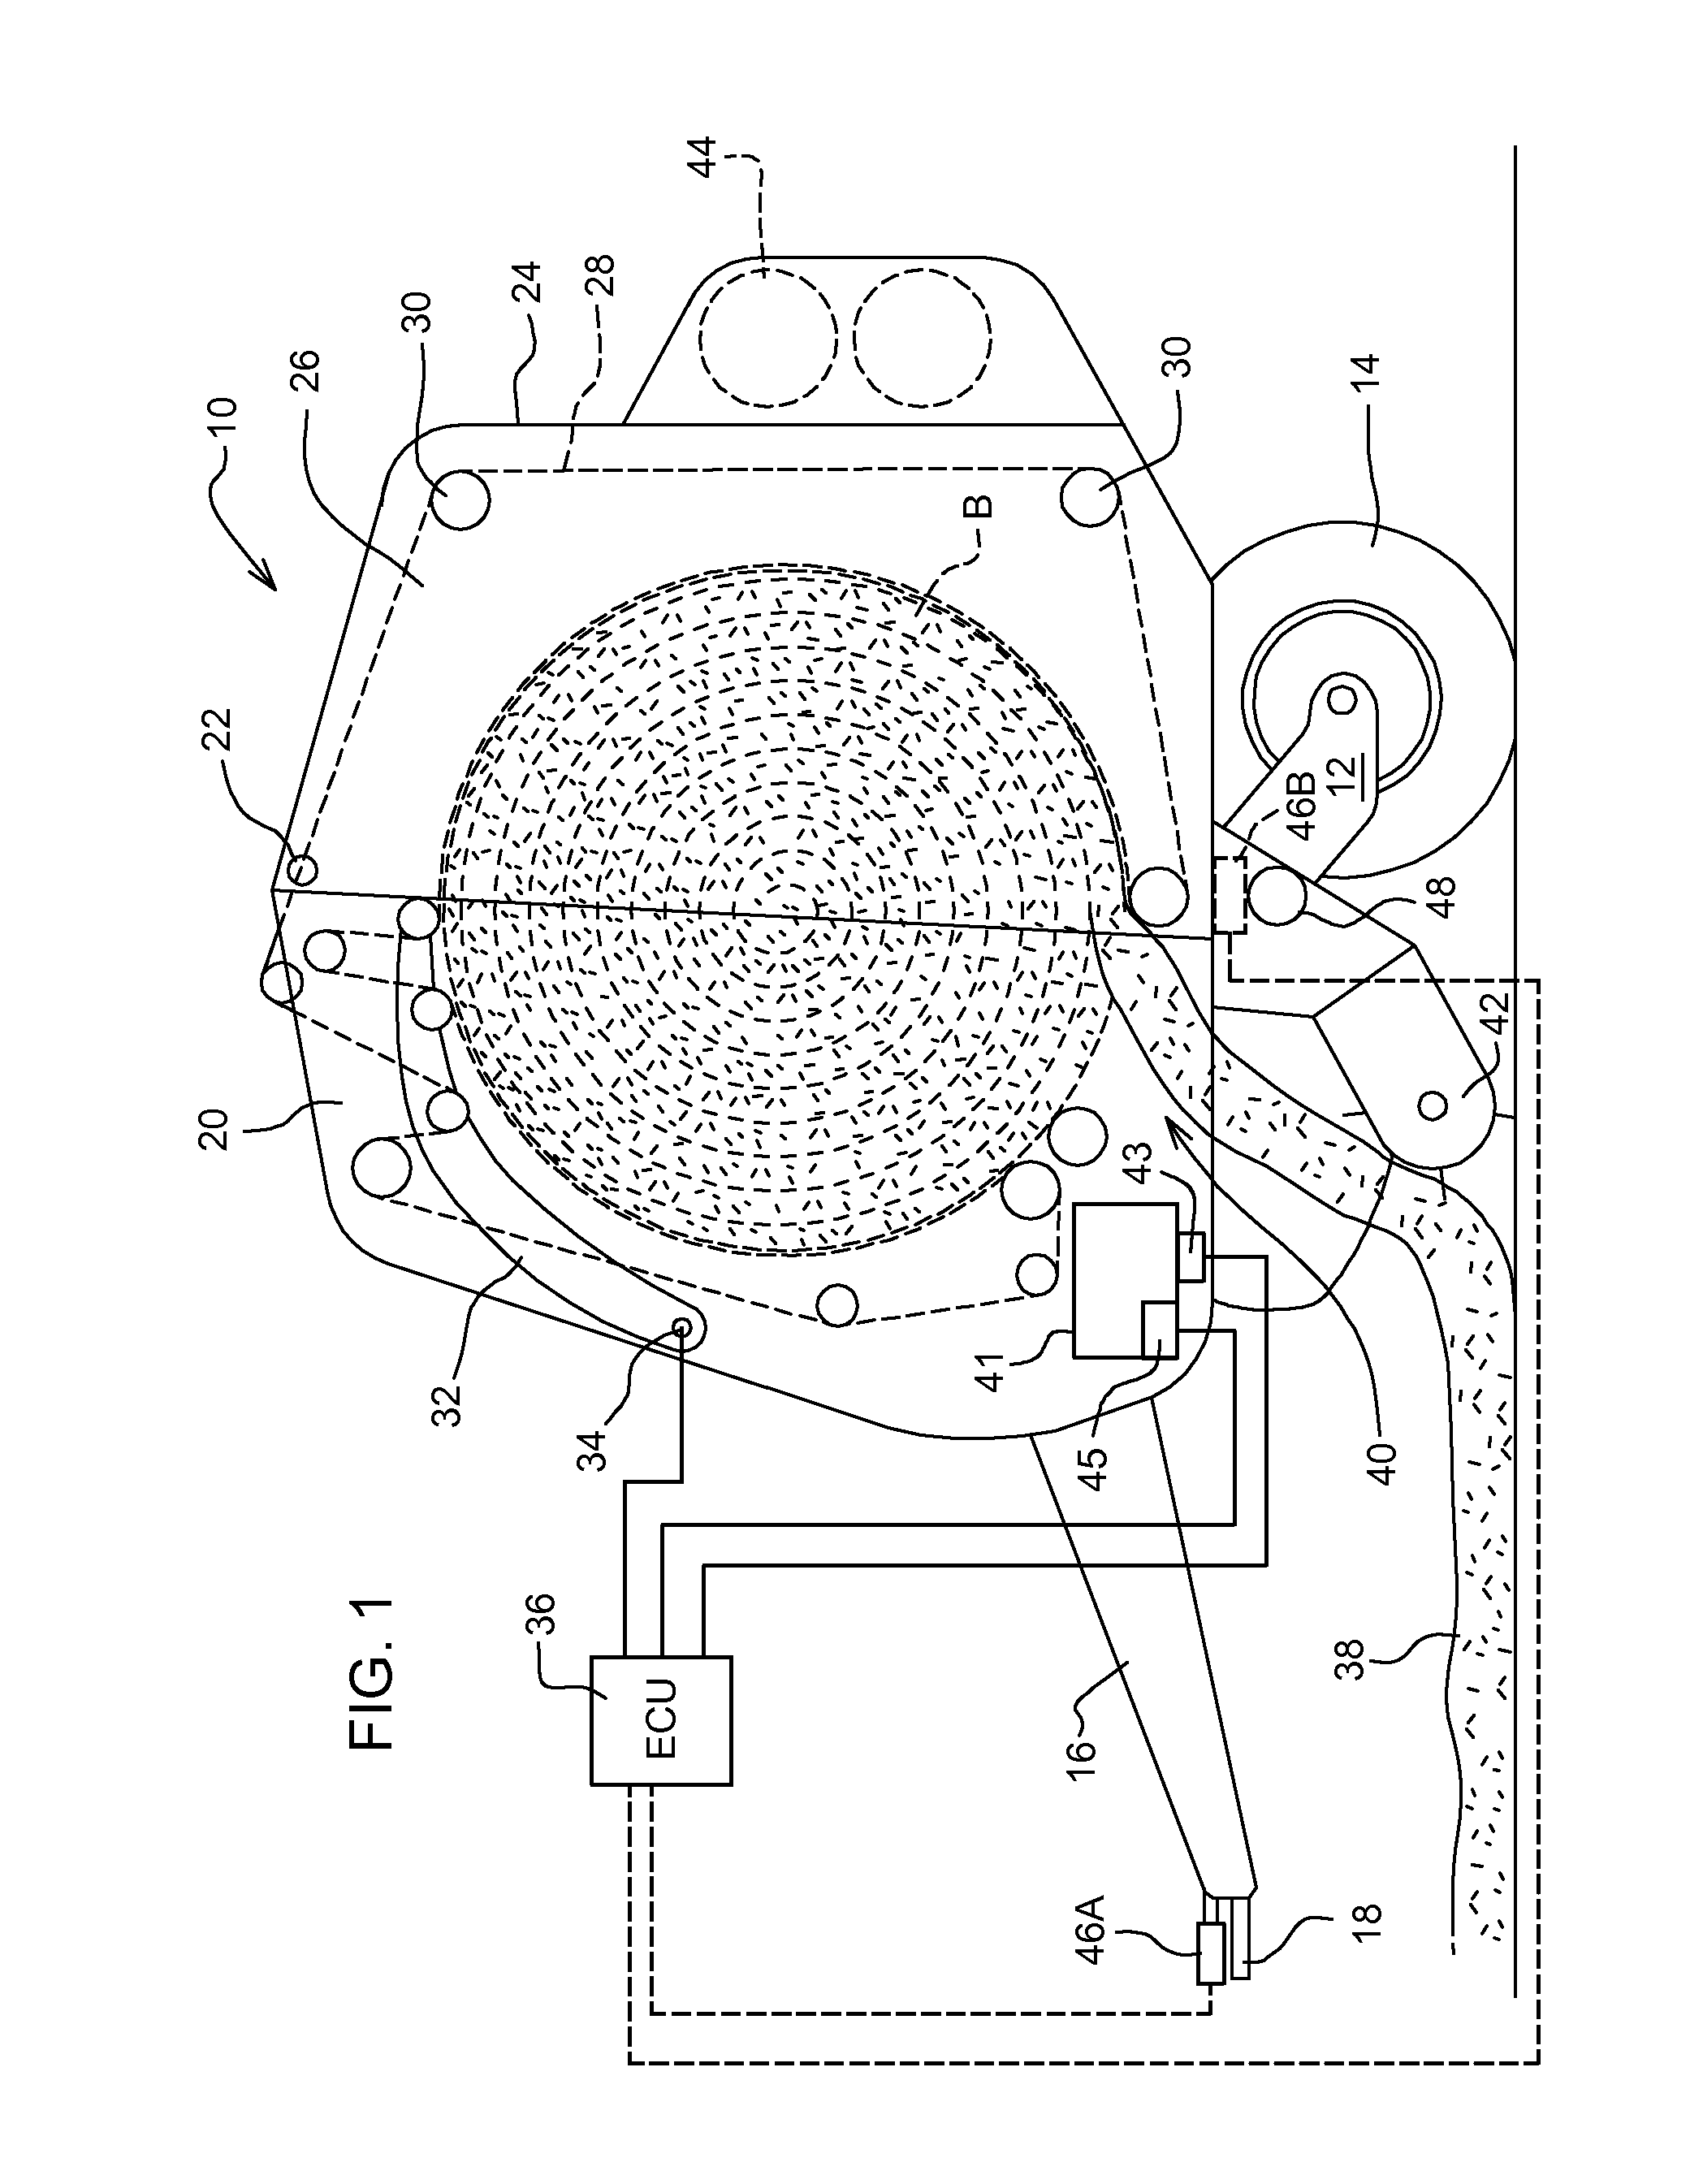 Method for adjusting a tare weight of an agricultural baler to reflect usage of preservative in treating formed bale